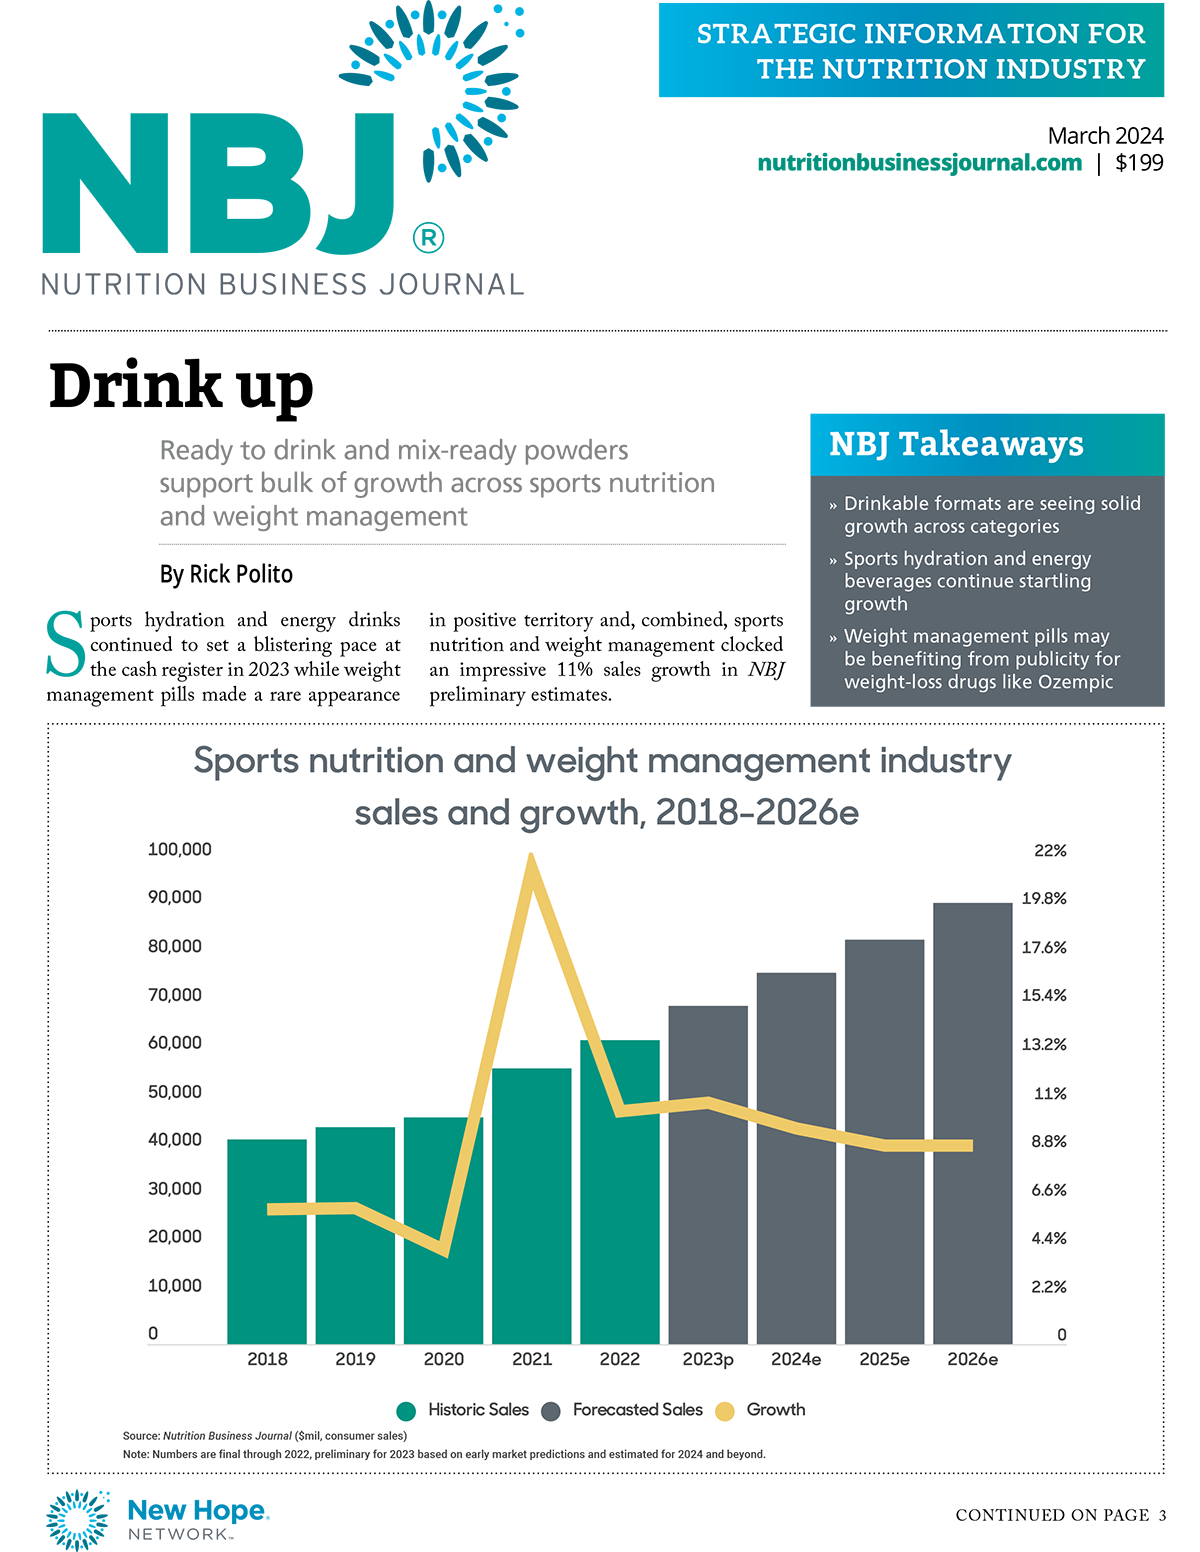 March 2024: Sports Nutrition and Weight Management Issue